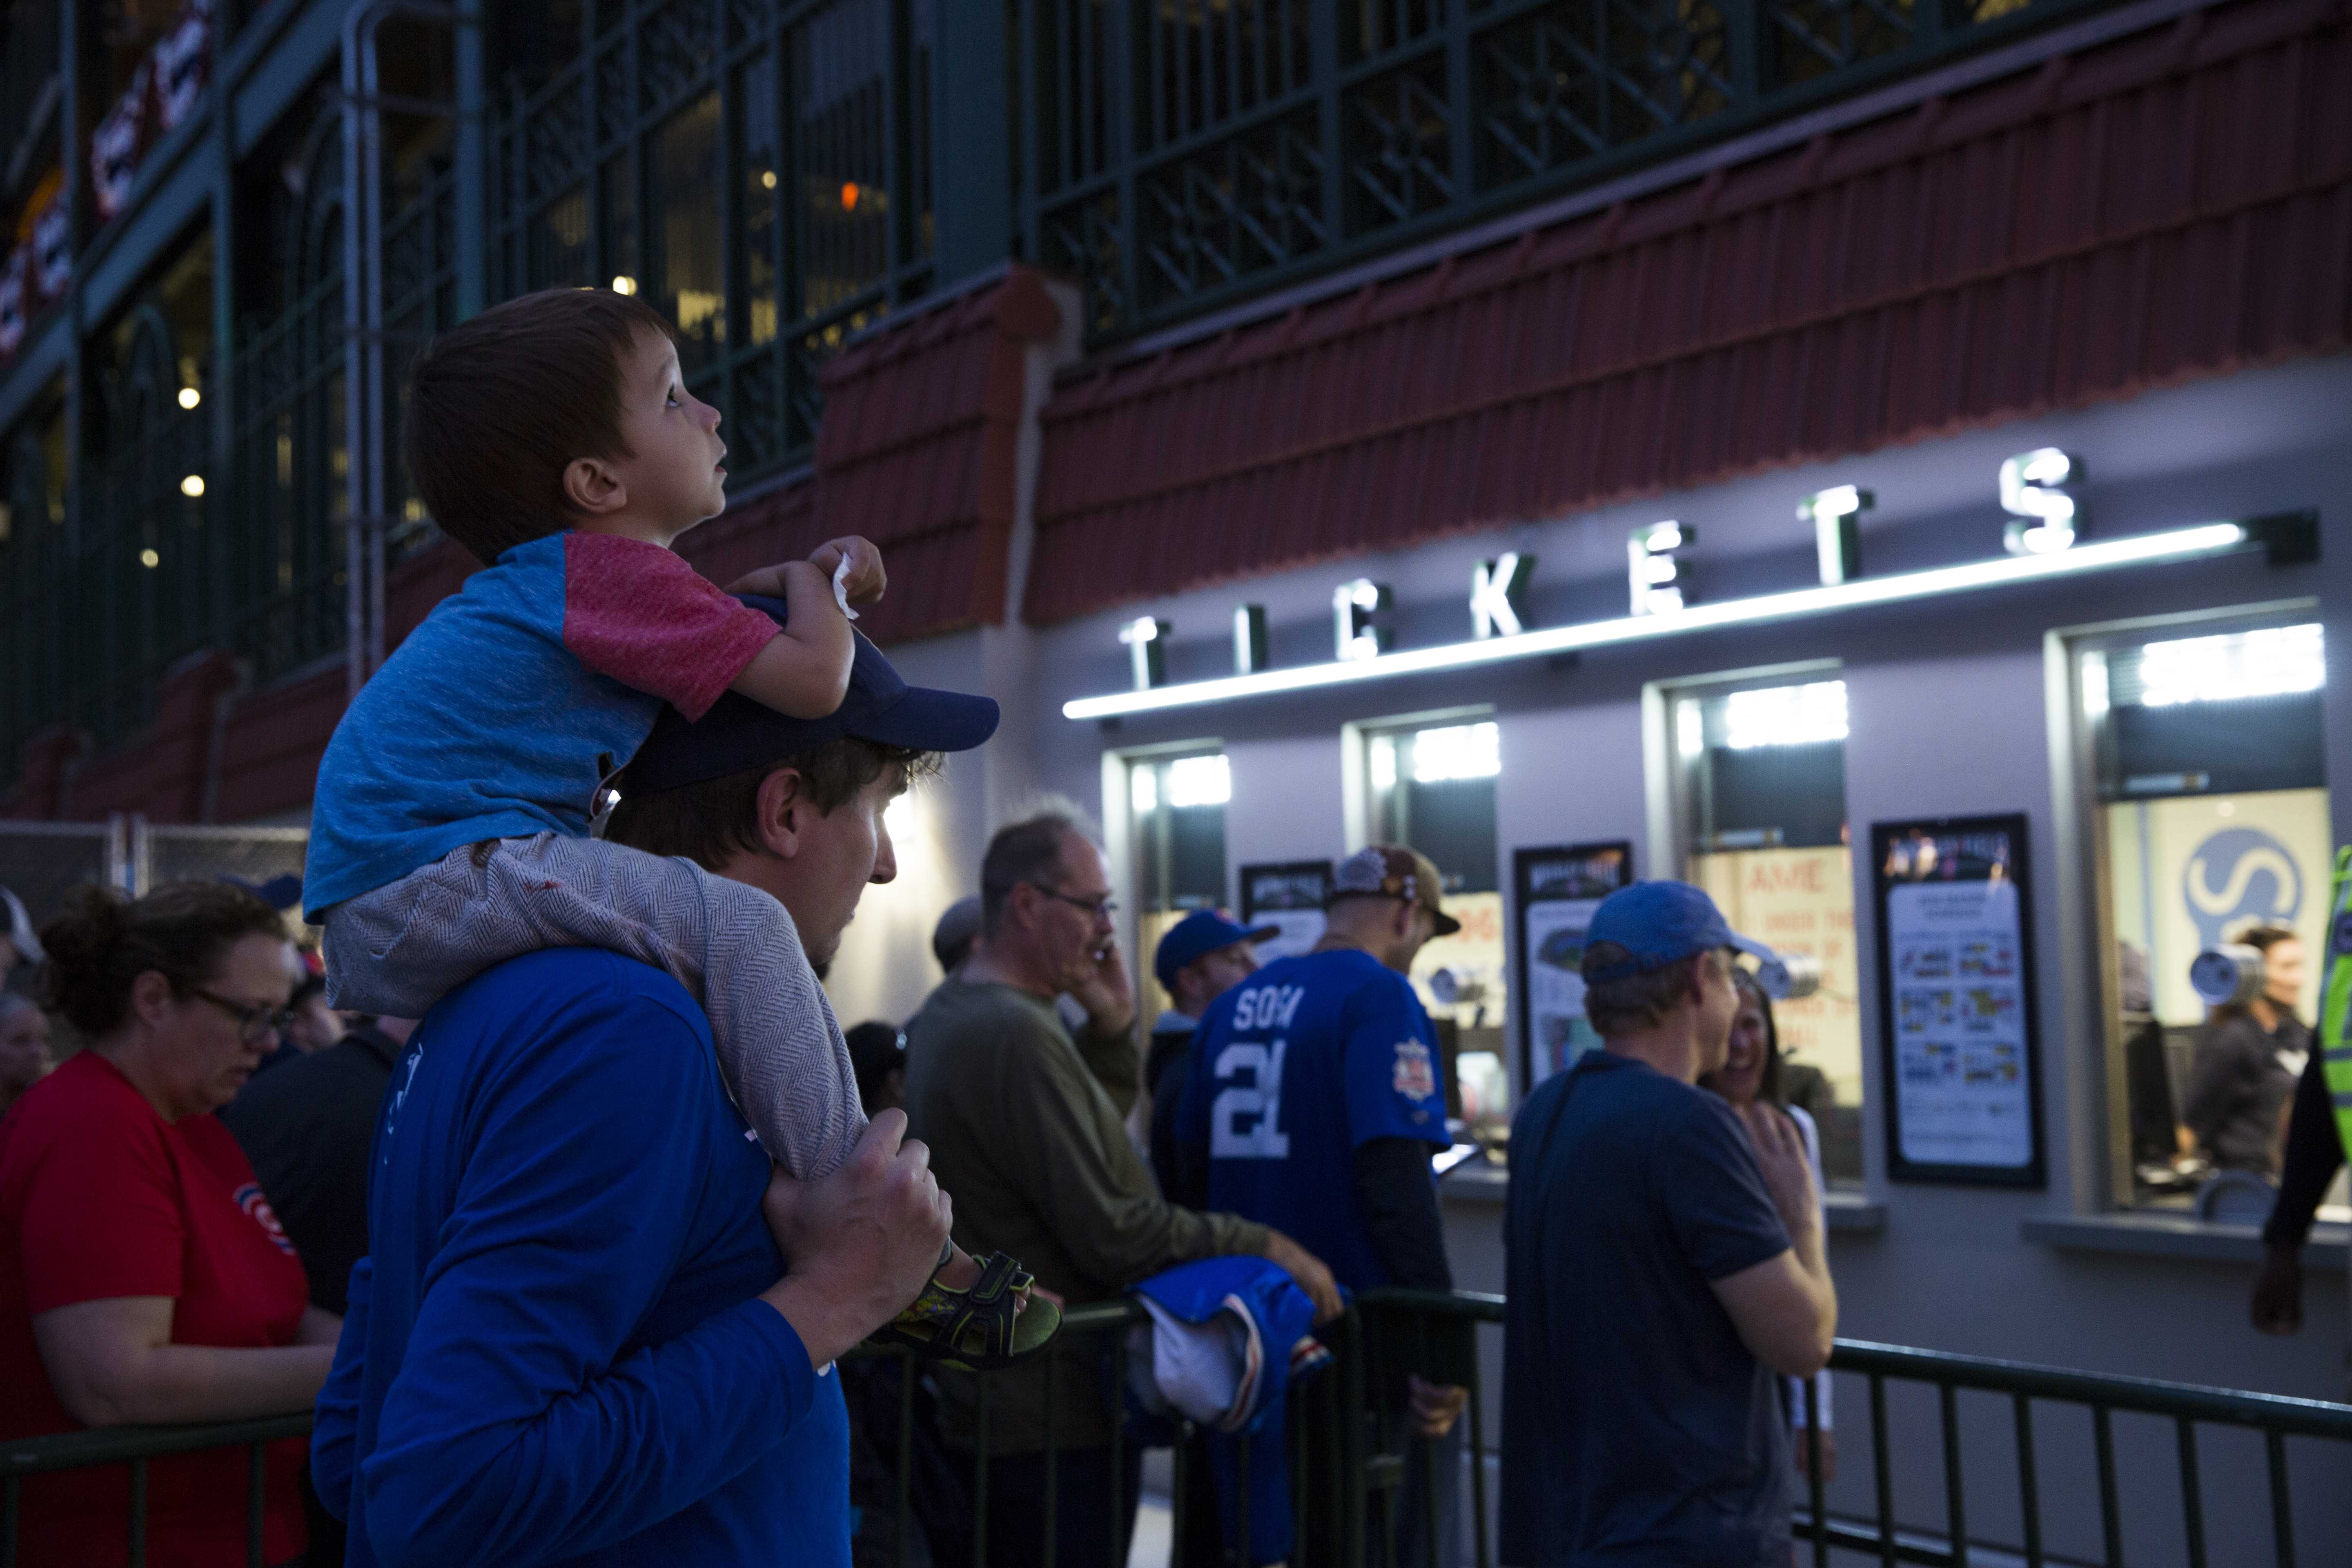 Though the Cubs lost last night, fans across multiple generations unite because of the team and their hope for the team (Geoff Stellfox | The DePaulia)